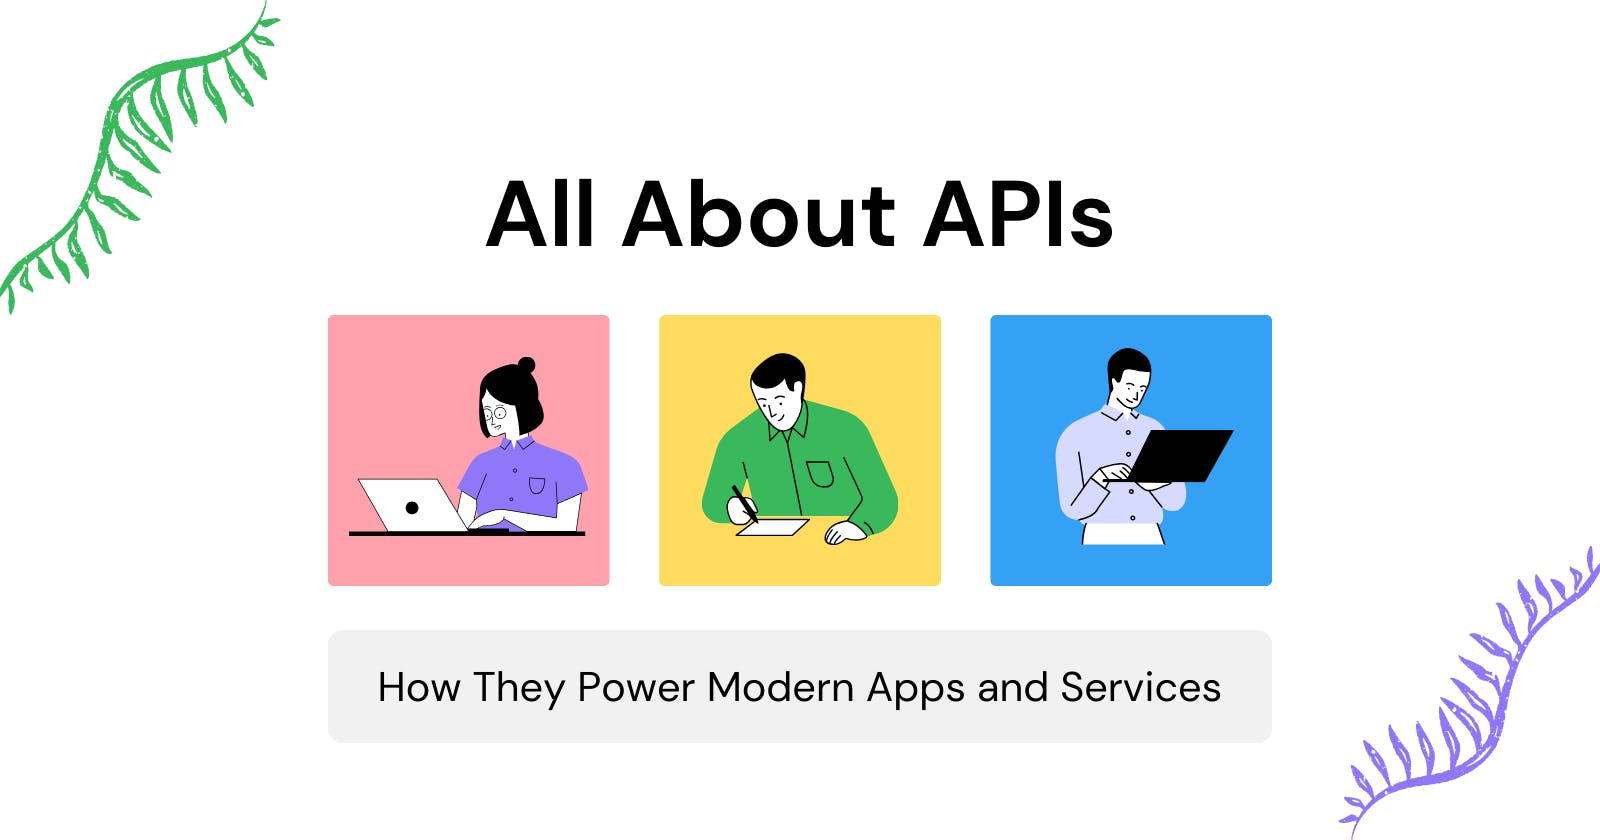 All About APIs: How They Power Modern Apps and Services